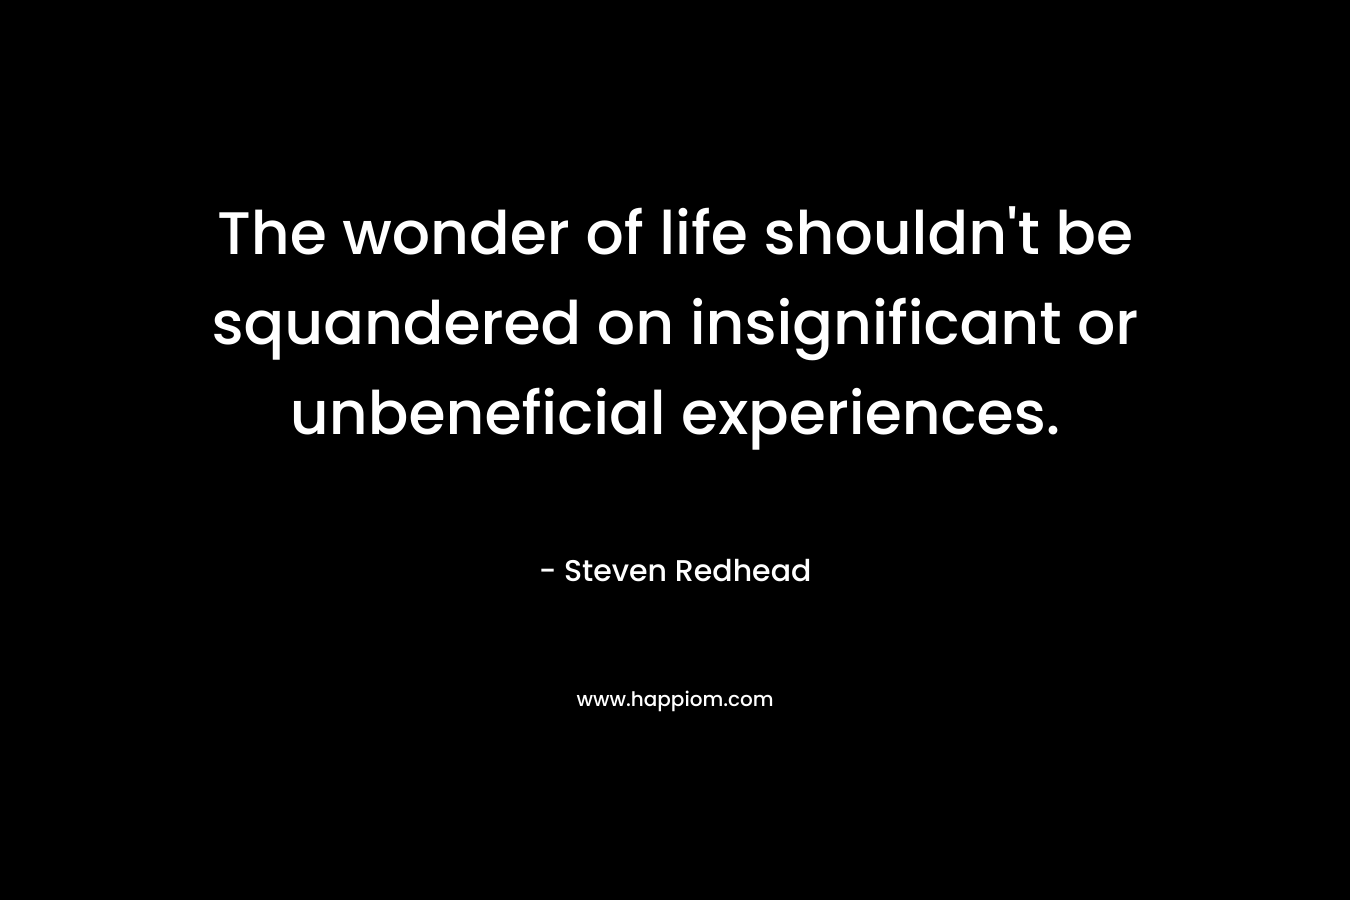 The wonder of life shouldn't be squandered on insignificant or unbeneficial experiences.